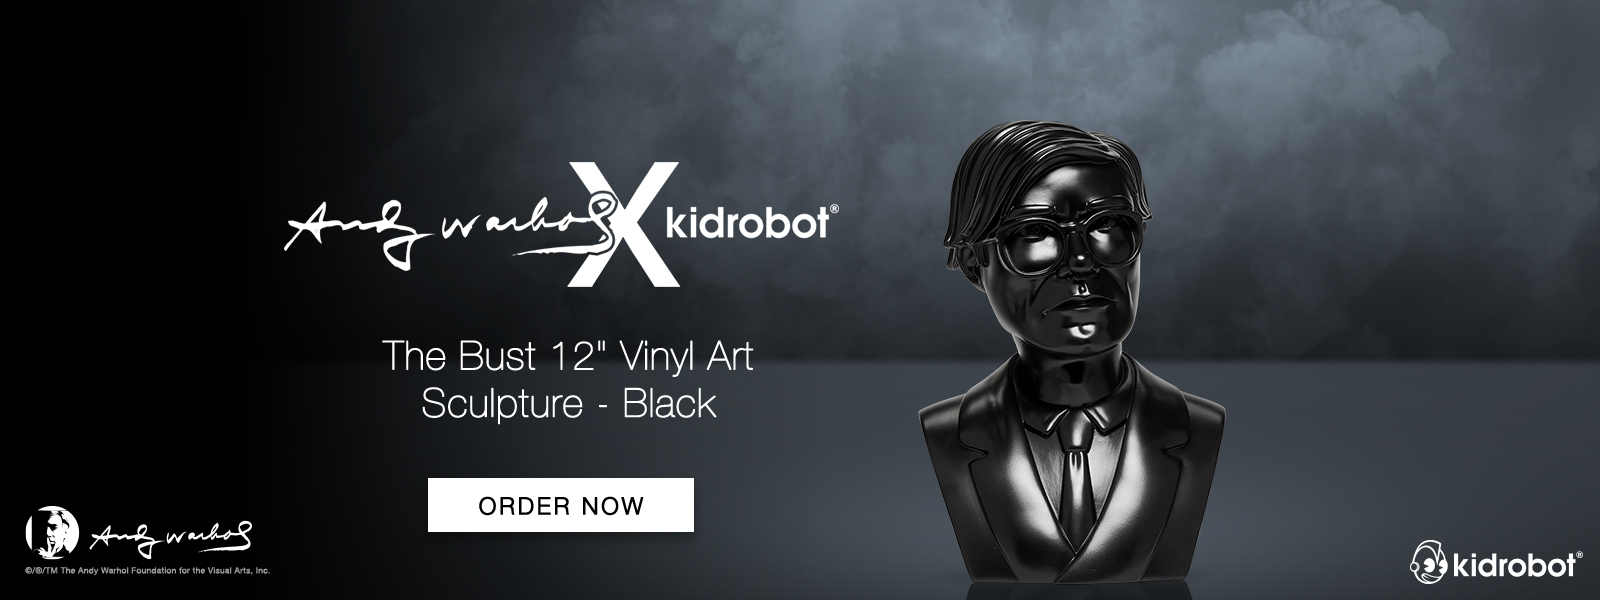 Limited Edition Andy Warhol 12” Bust Vinyl Art Sculpture – Black Edition Drops Now at Kidrobot.com – Limited Edition of 200